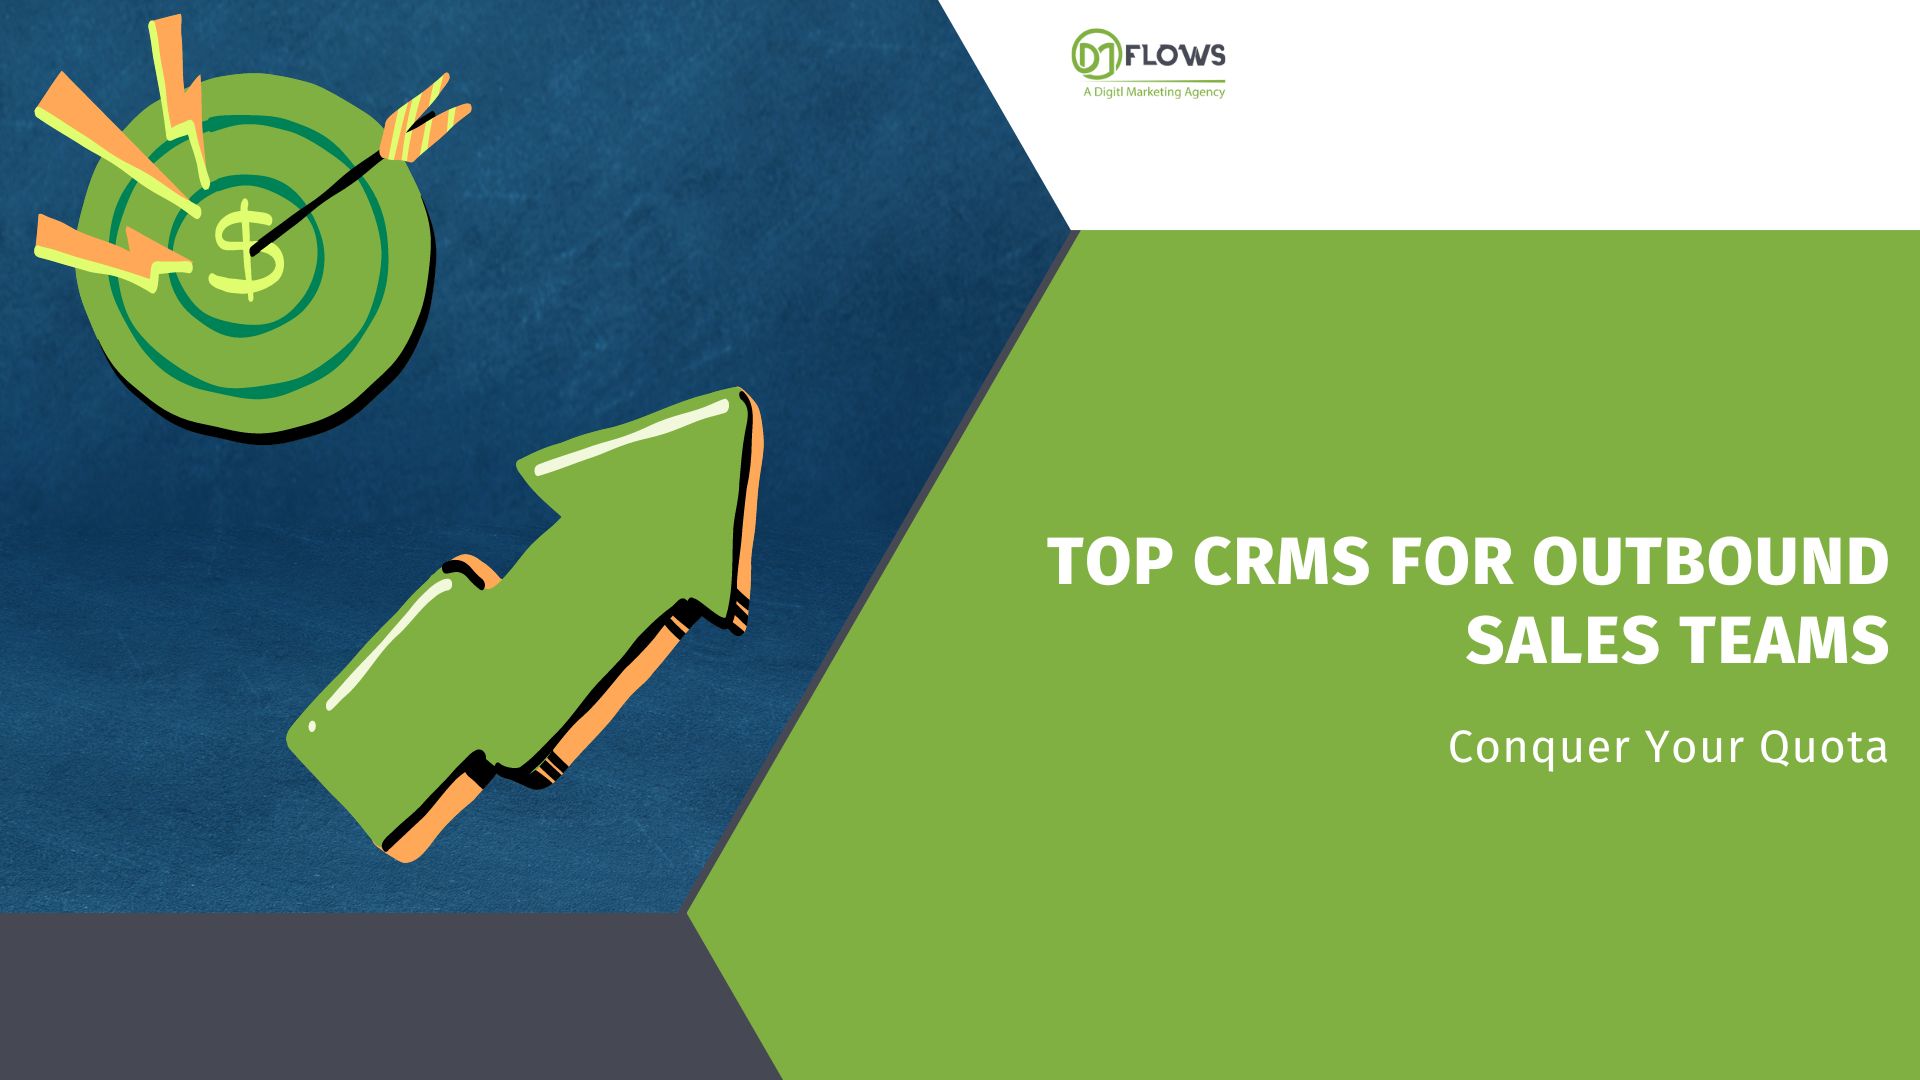 Conquer Your Quota: Top CRMs for Outbound Sales Teams